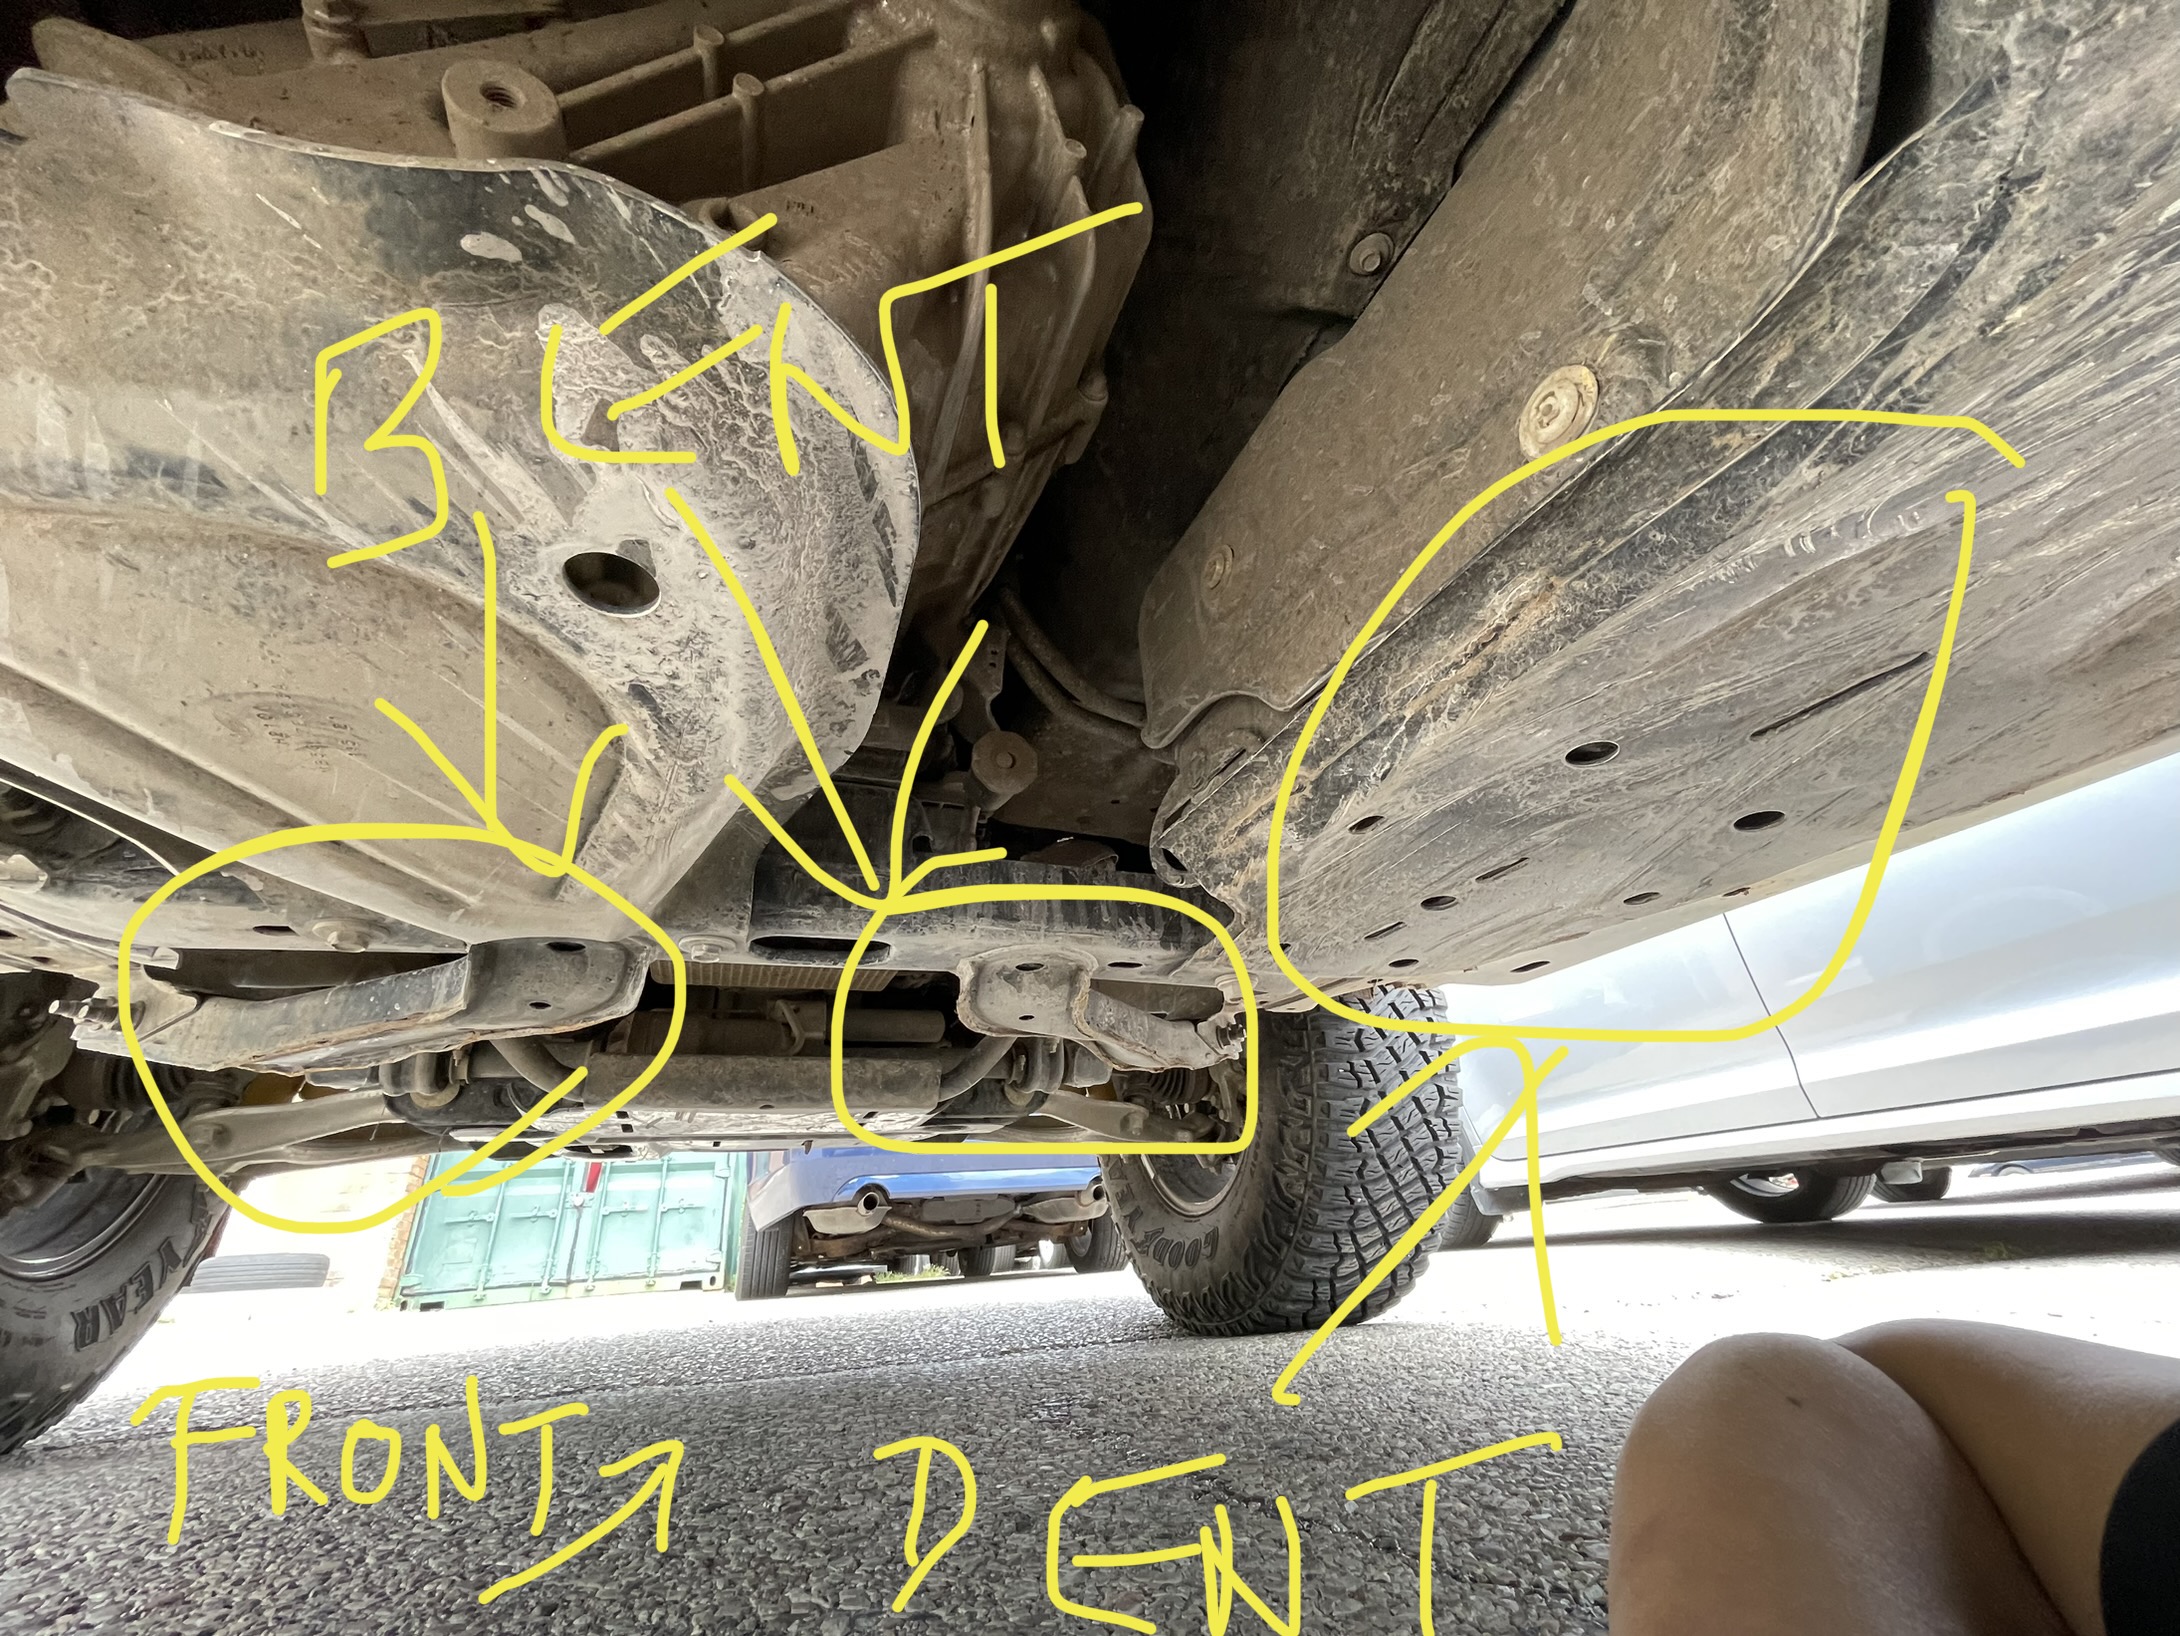 Ford Bronco Went to a technical trail. Did I do damage to my underside? 899D5BF6-BBD9-4AD4-AA83-D67AA292AE78